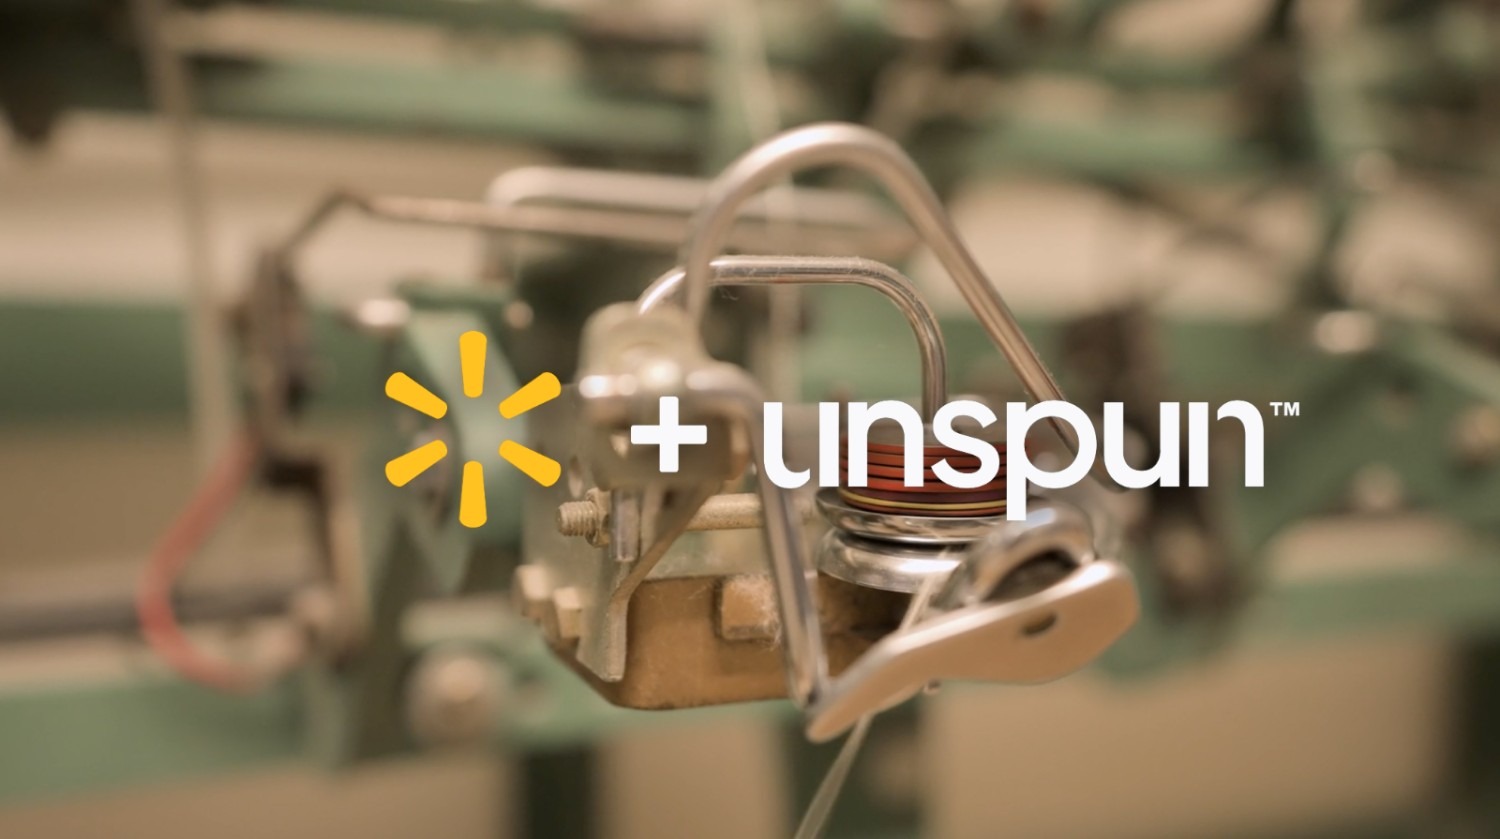 Walmart and unspun Take On Apparel Manufacturing Waste With 3D Fabric Weaving Pilot Project